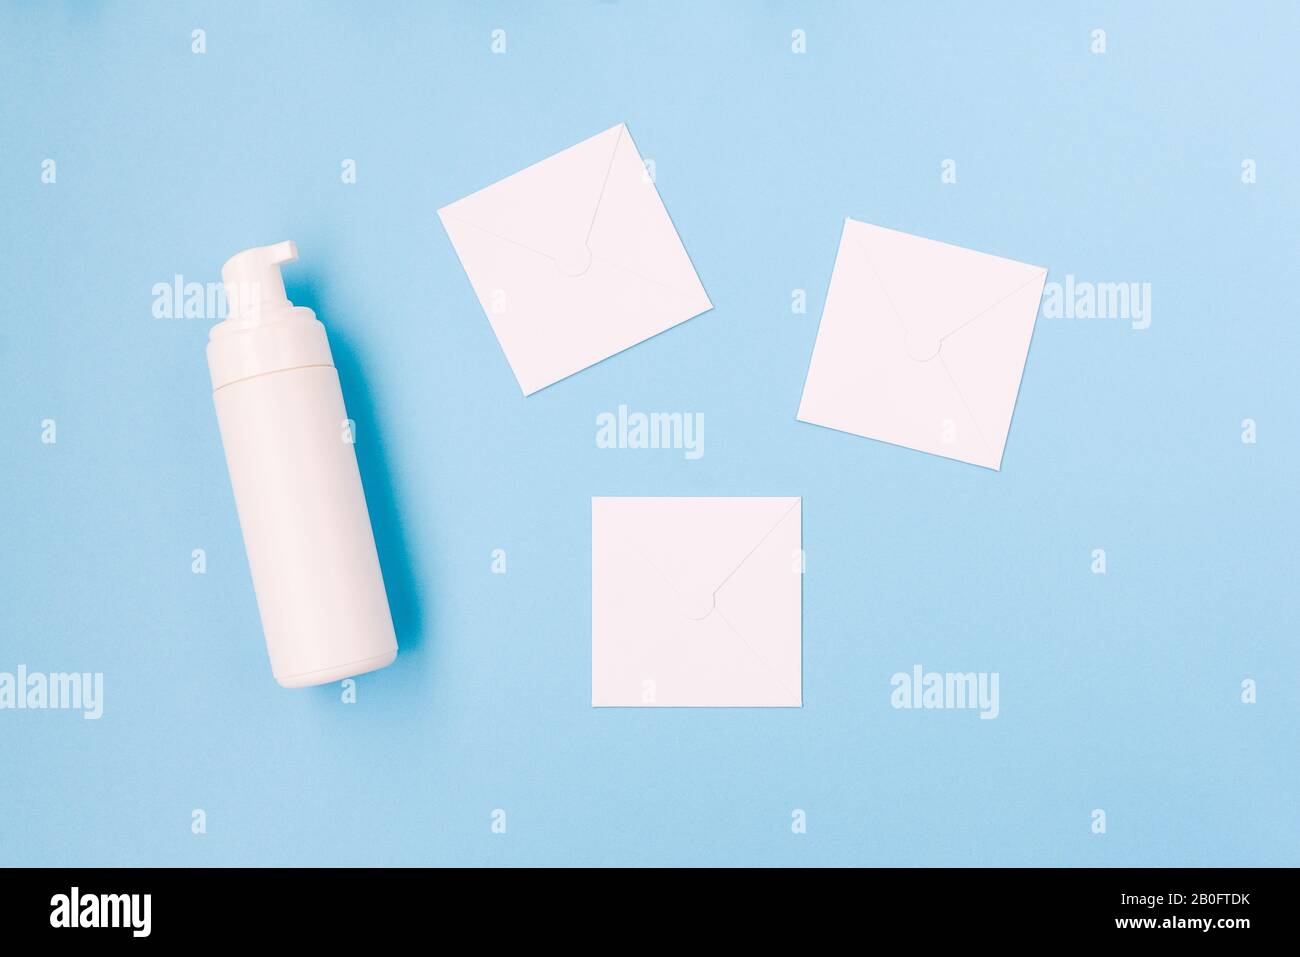 Foam for washing and white paper sheets on a blue background. Plastic white bottle. Cosmetic products for body and face care with copy space Stock Photo